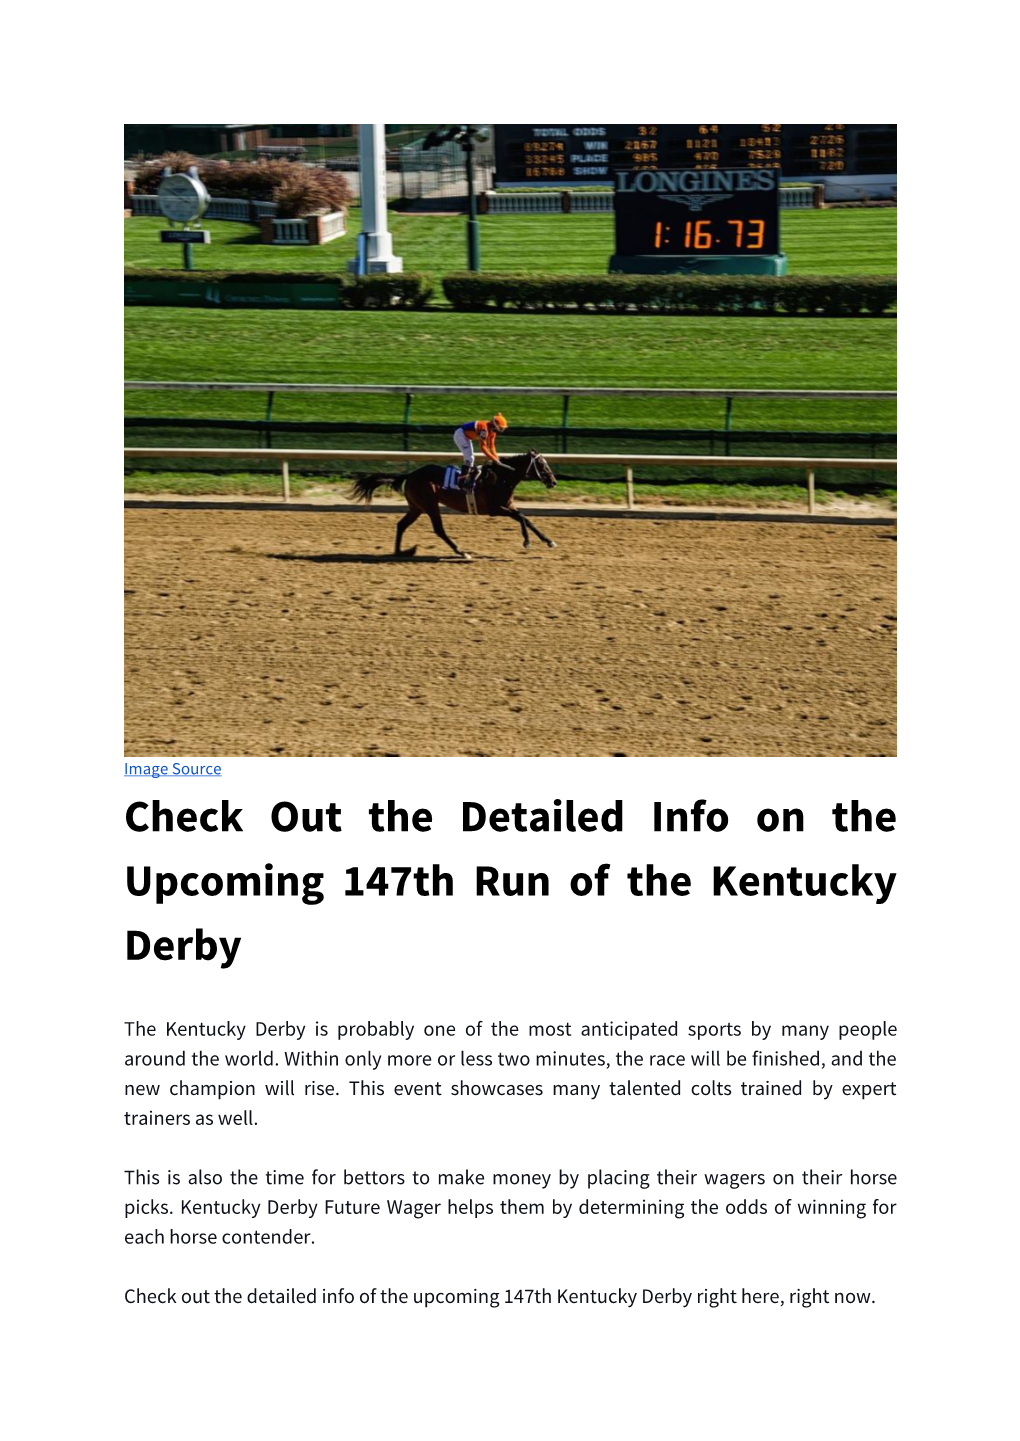 Check out the Detailed Info on the Upcoming 147Th Run of the Kentucky Derby